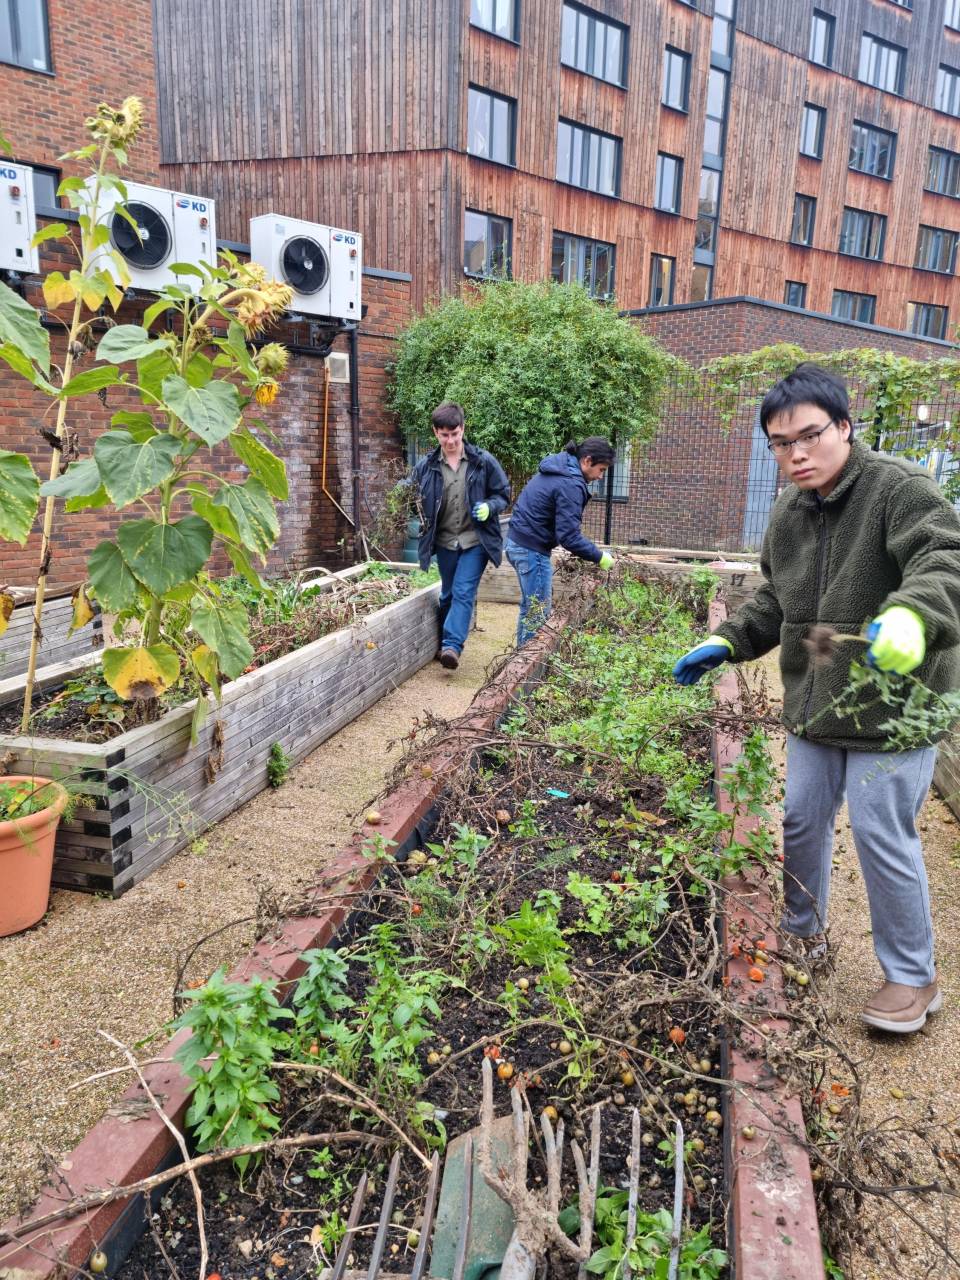 Student volunteers digging out summer plants from the campus allotments to get the beds ready for a new year.